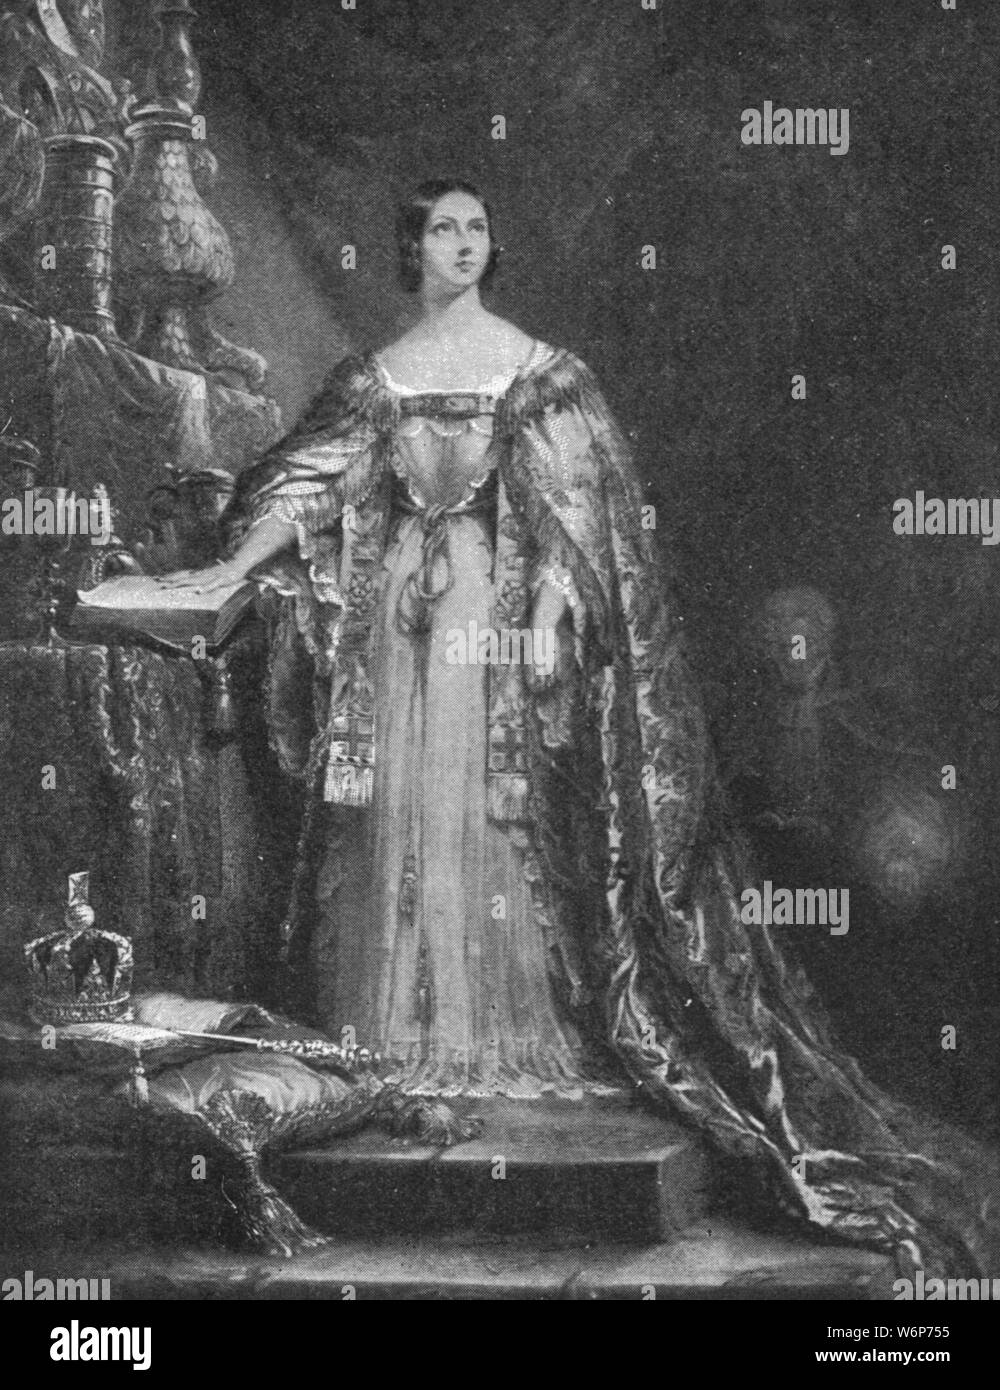 'Taking the Oath to maintain the Protestant Faith at her Coronation, June 28th, 1838', (1901). Victoria (1819-1901), Queen of the United Kingdom of Great Britain and Ireland, ruled from 1837 until her death. From &quot;The Illustrated London News Record of the Glorious Reign of Queen Victoria 1837-1901: The Life and Accession of King Edward VII. and the Life of Queen Alexandra&quot;. [London, 1901] Stock Photo